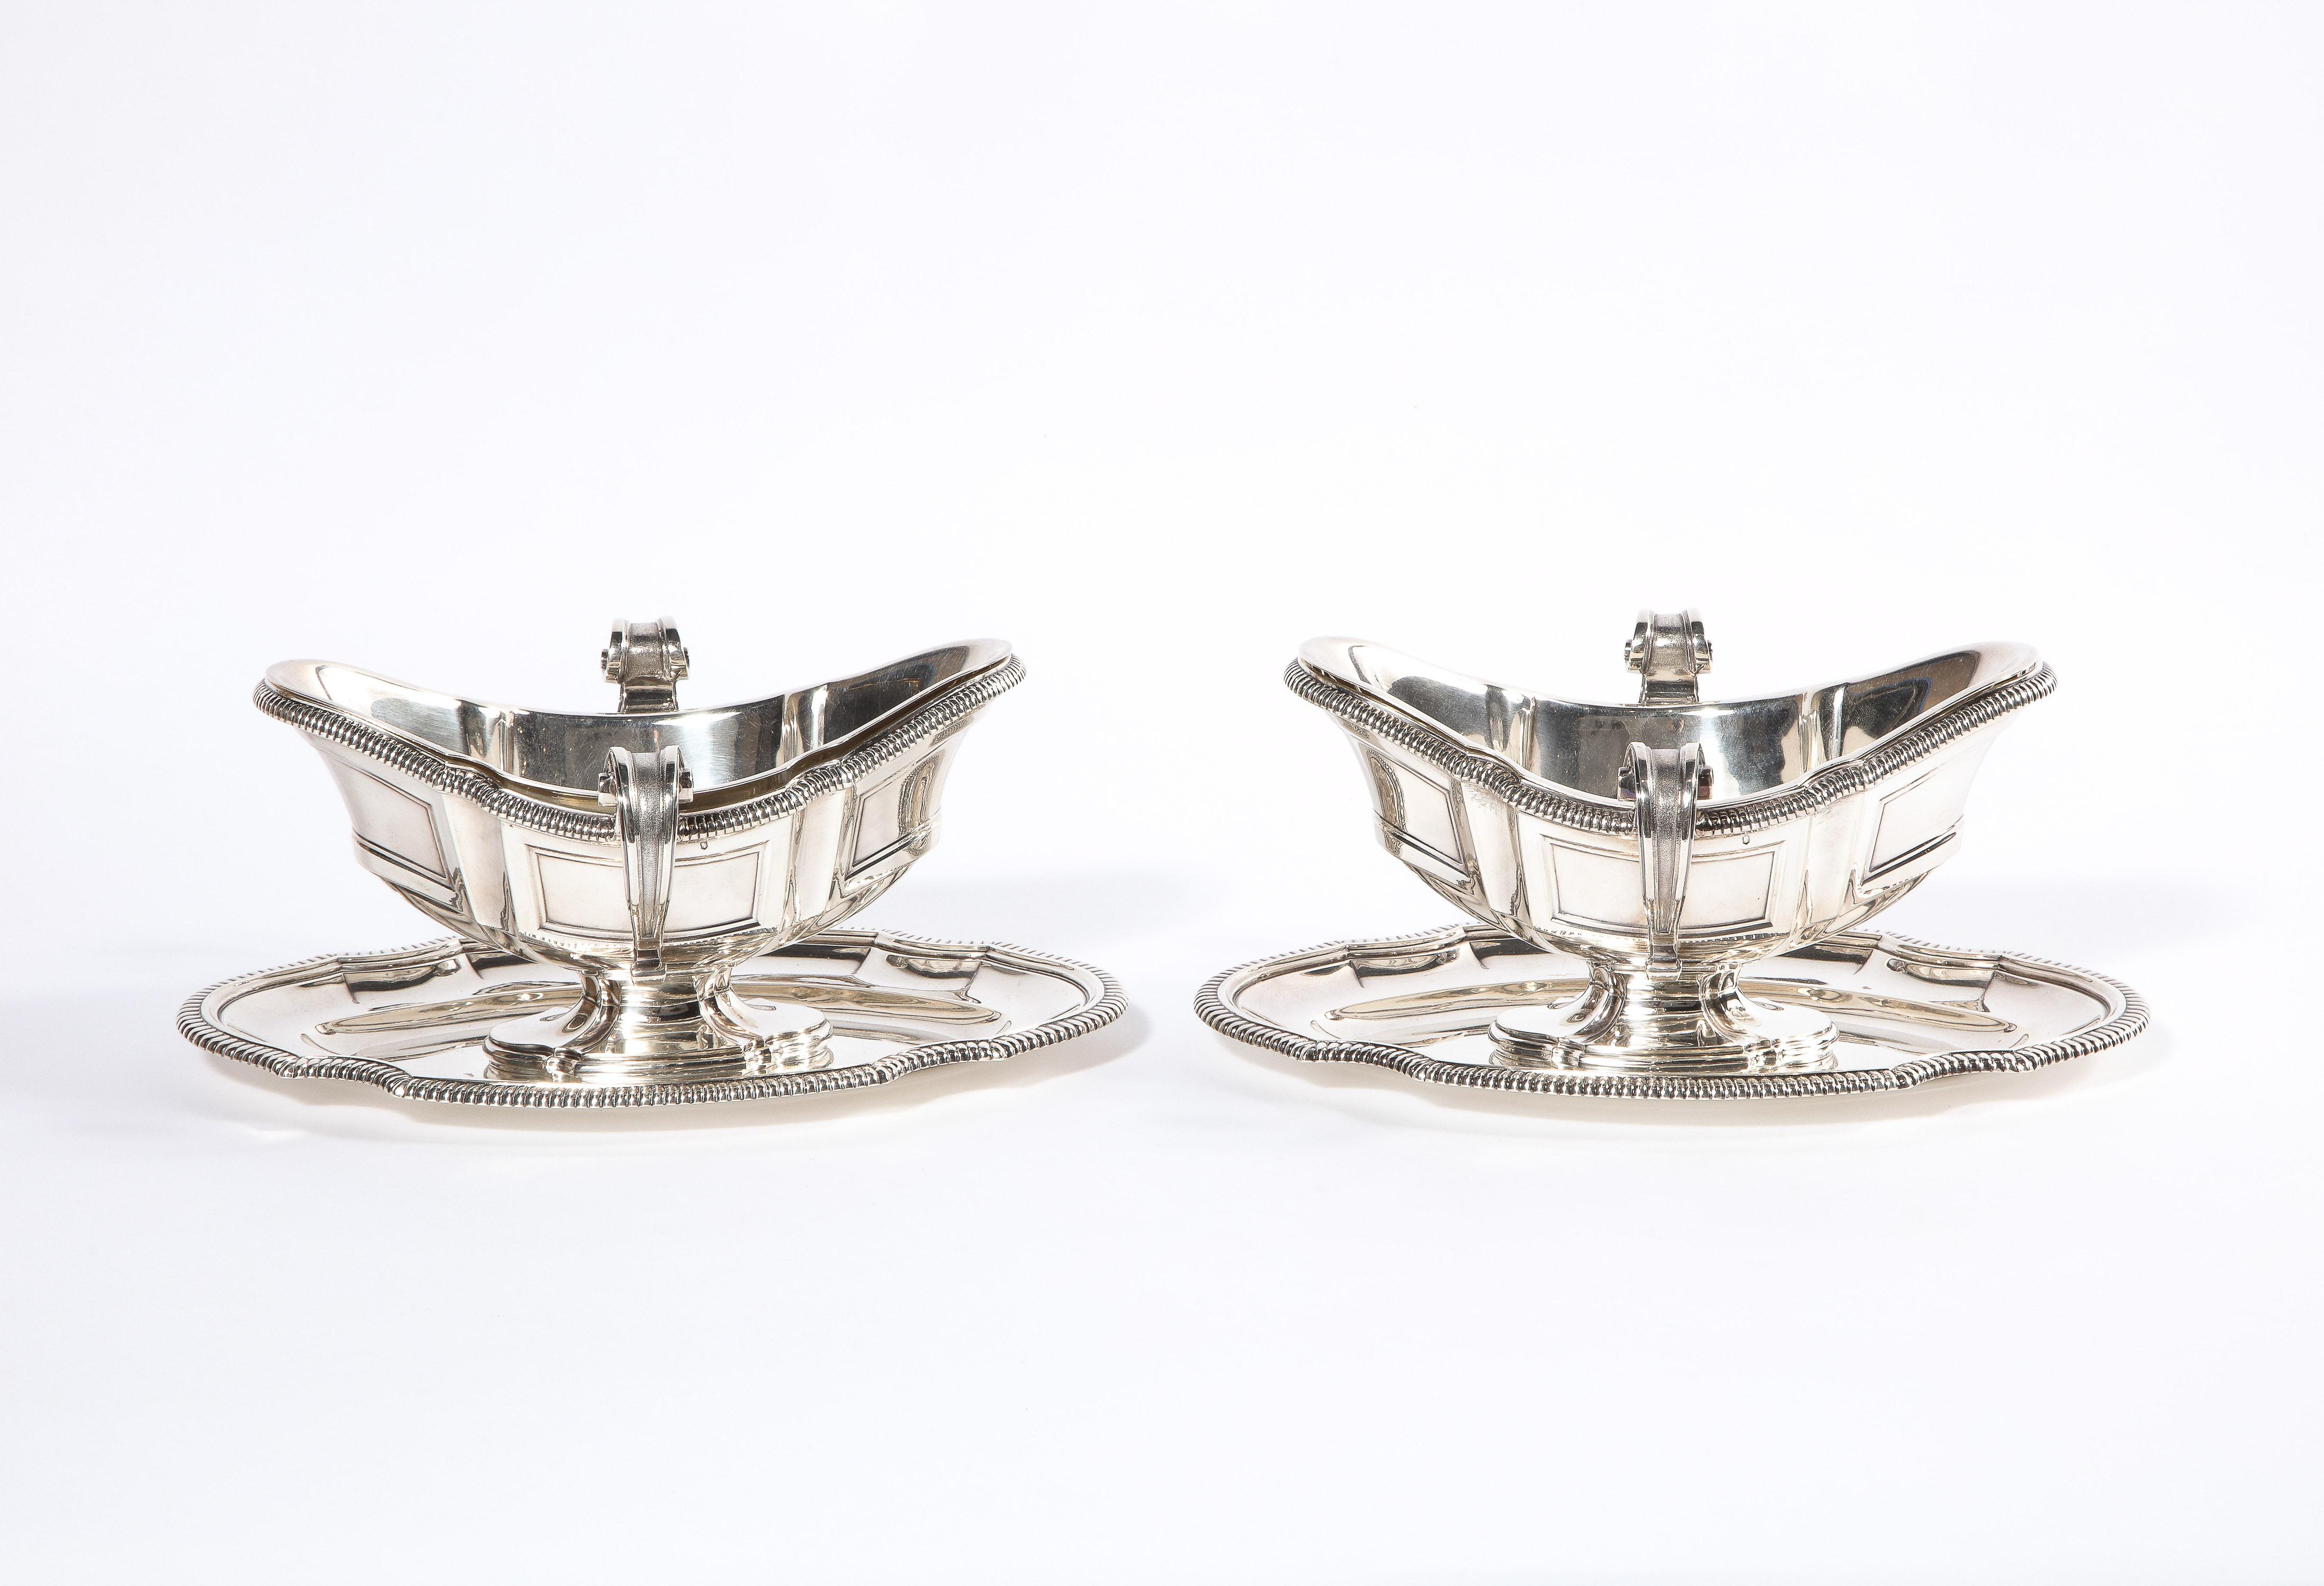 Napoleon III Pair of French Silver Sauceboats by Gustave Keller, Paris, circa 1880